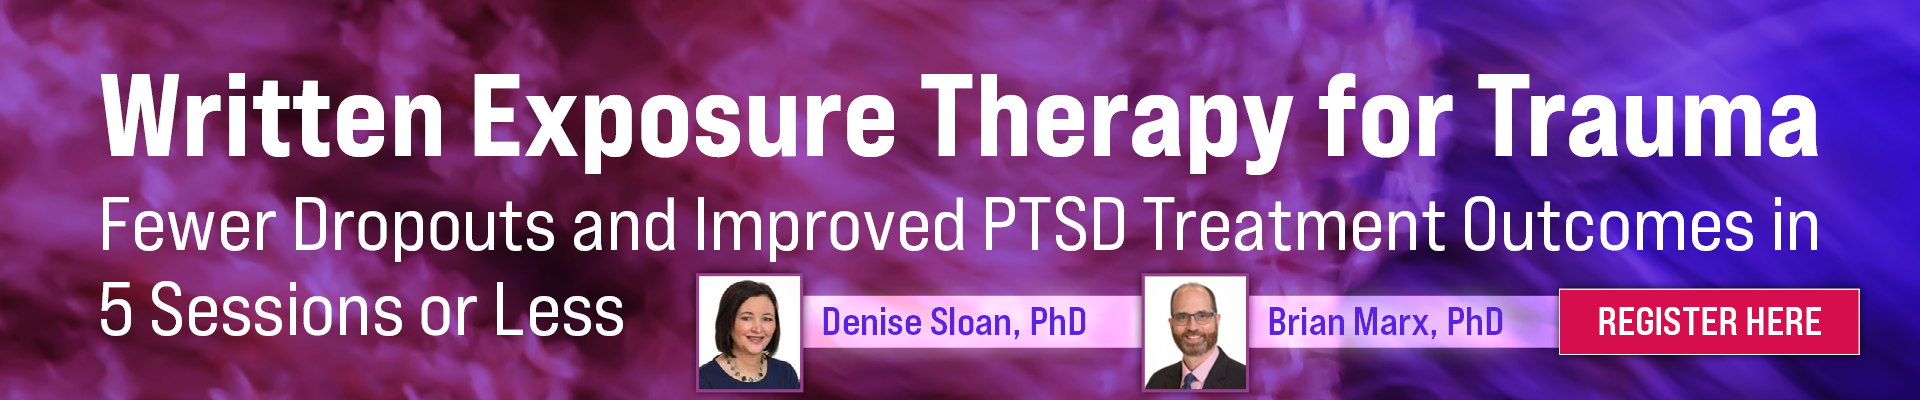 Written Exposure Therapy for Trauma: Fewer Dropouts and Improved PTSD Treatment Outcomes in 5 Sessions or Less